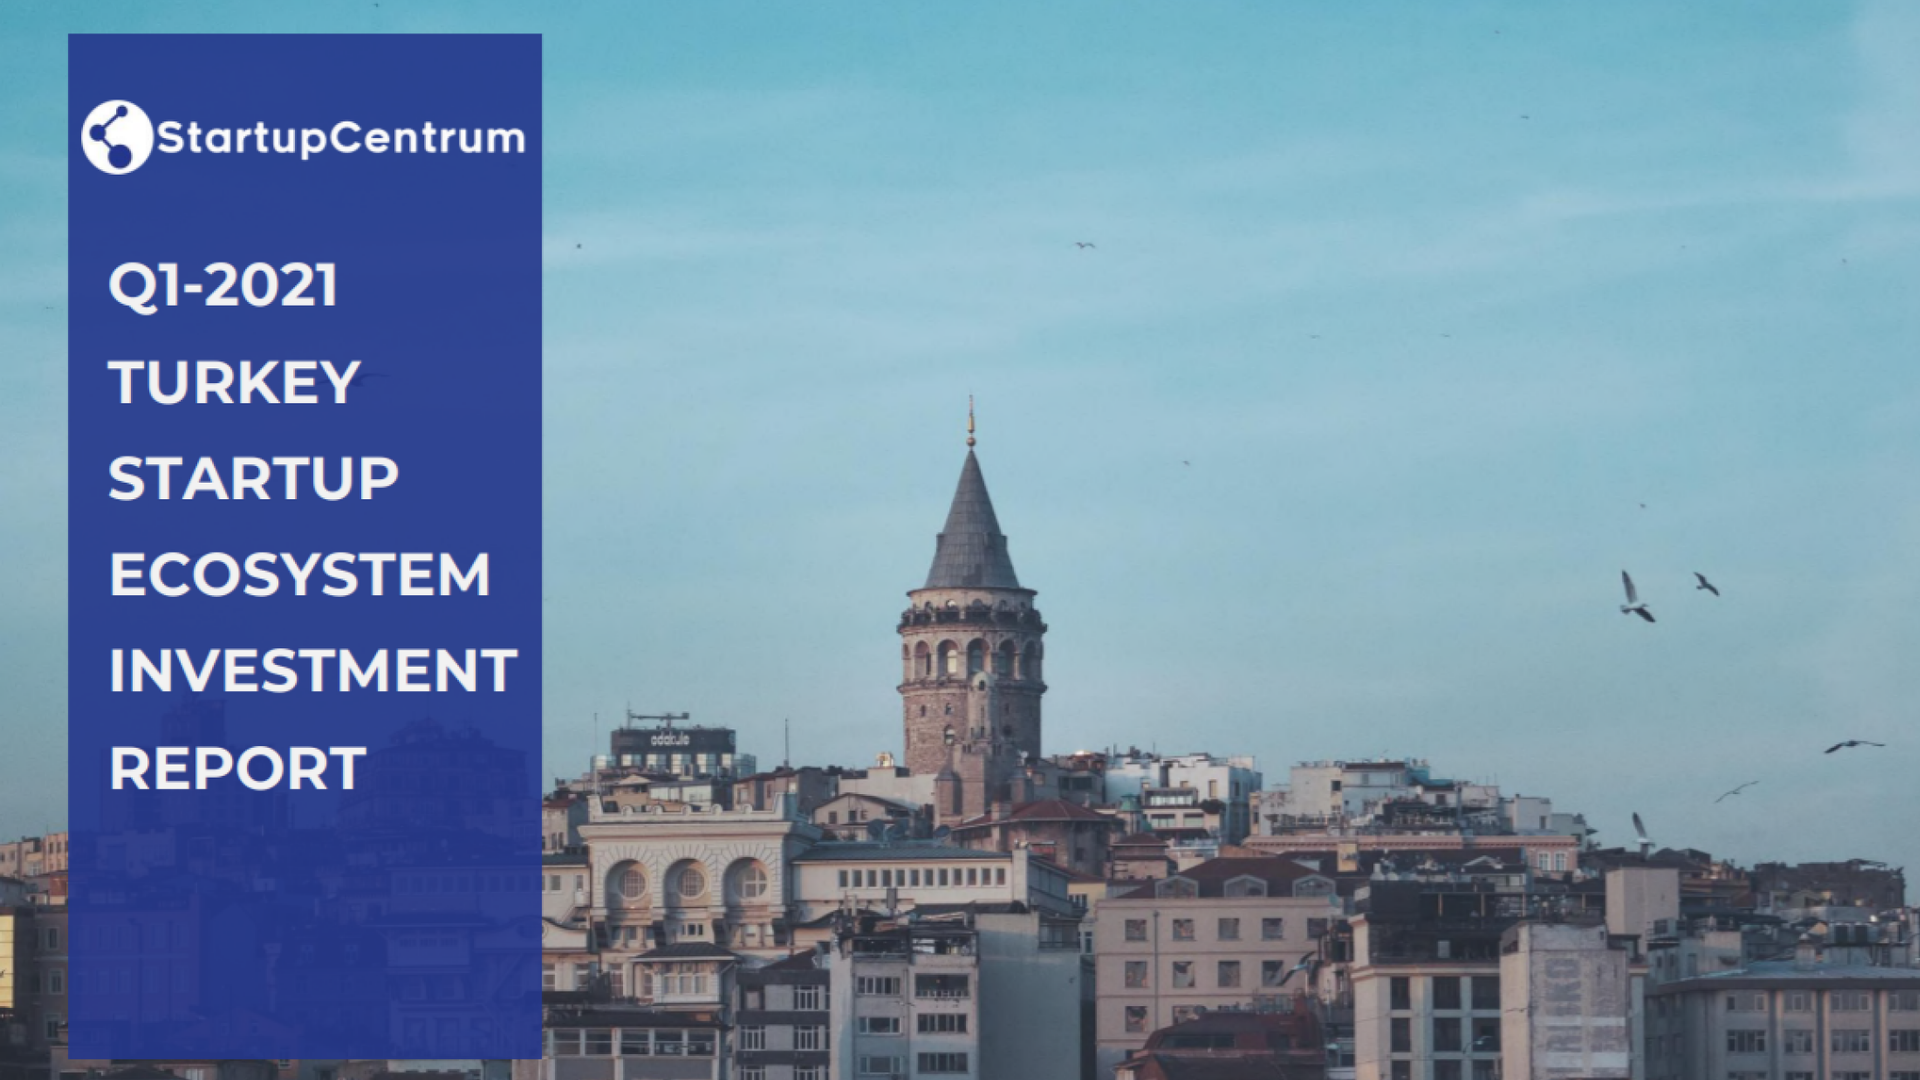 Q1-2021 Turkey Startup Ecosystem Investment Report Cover Image